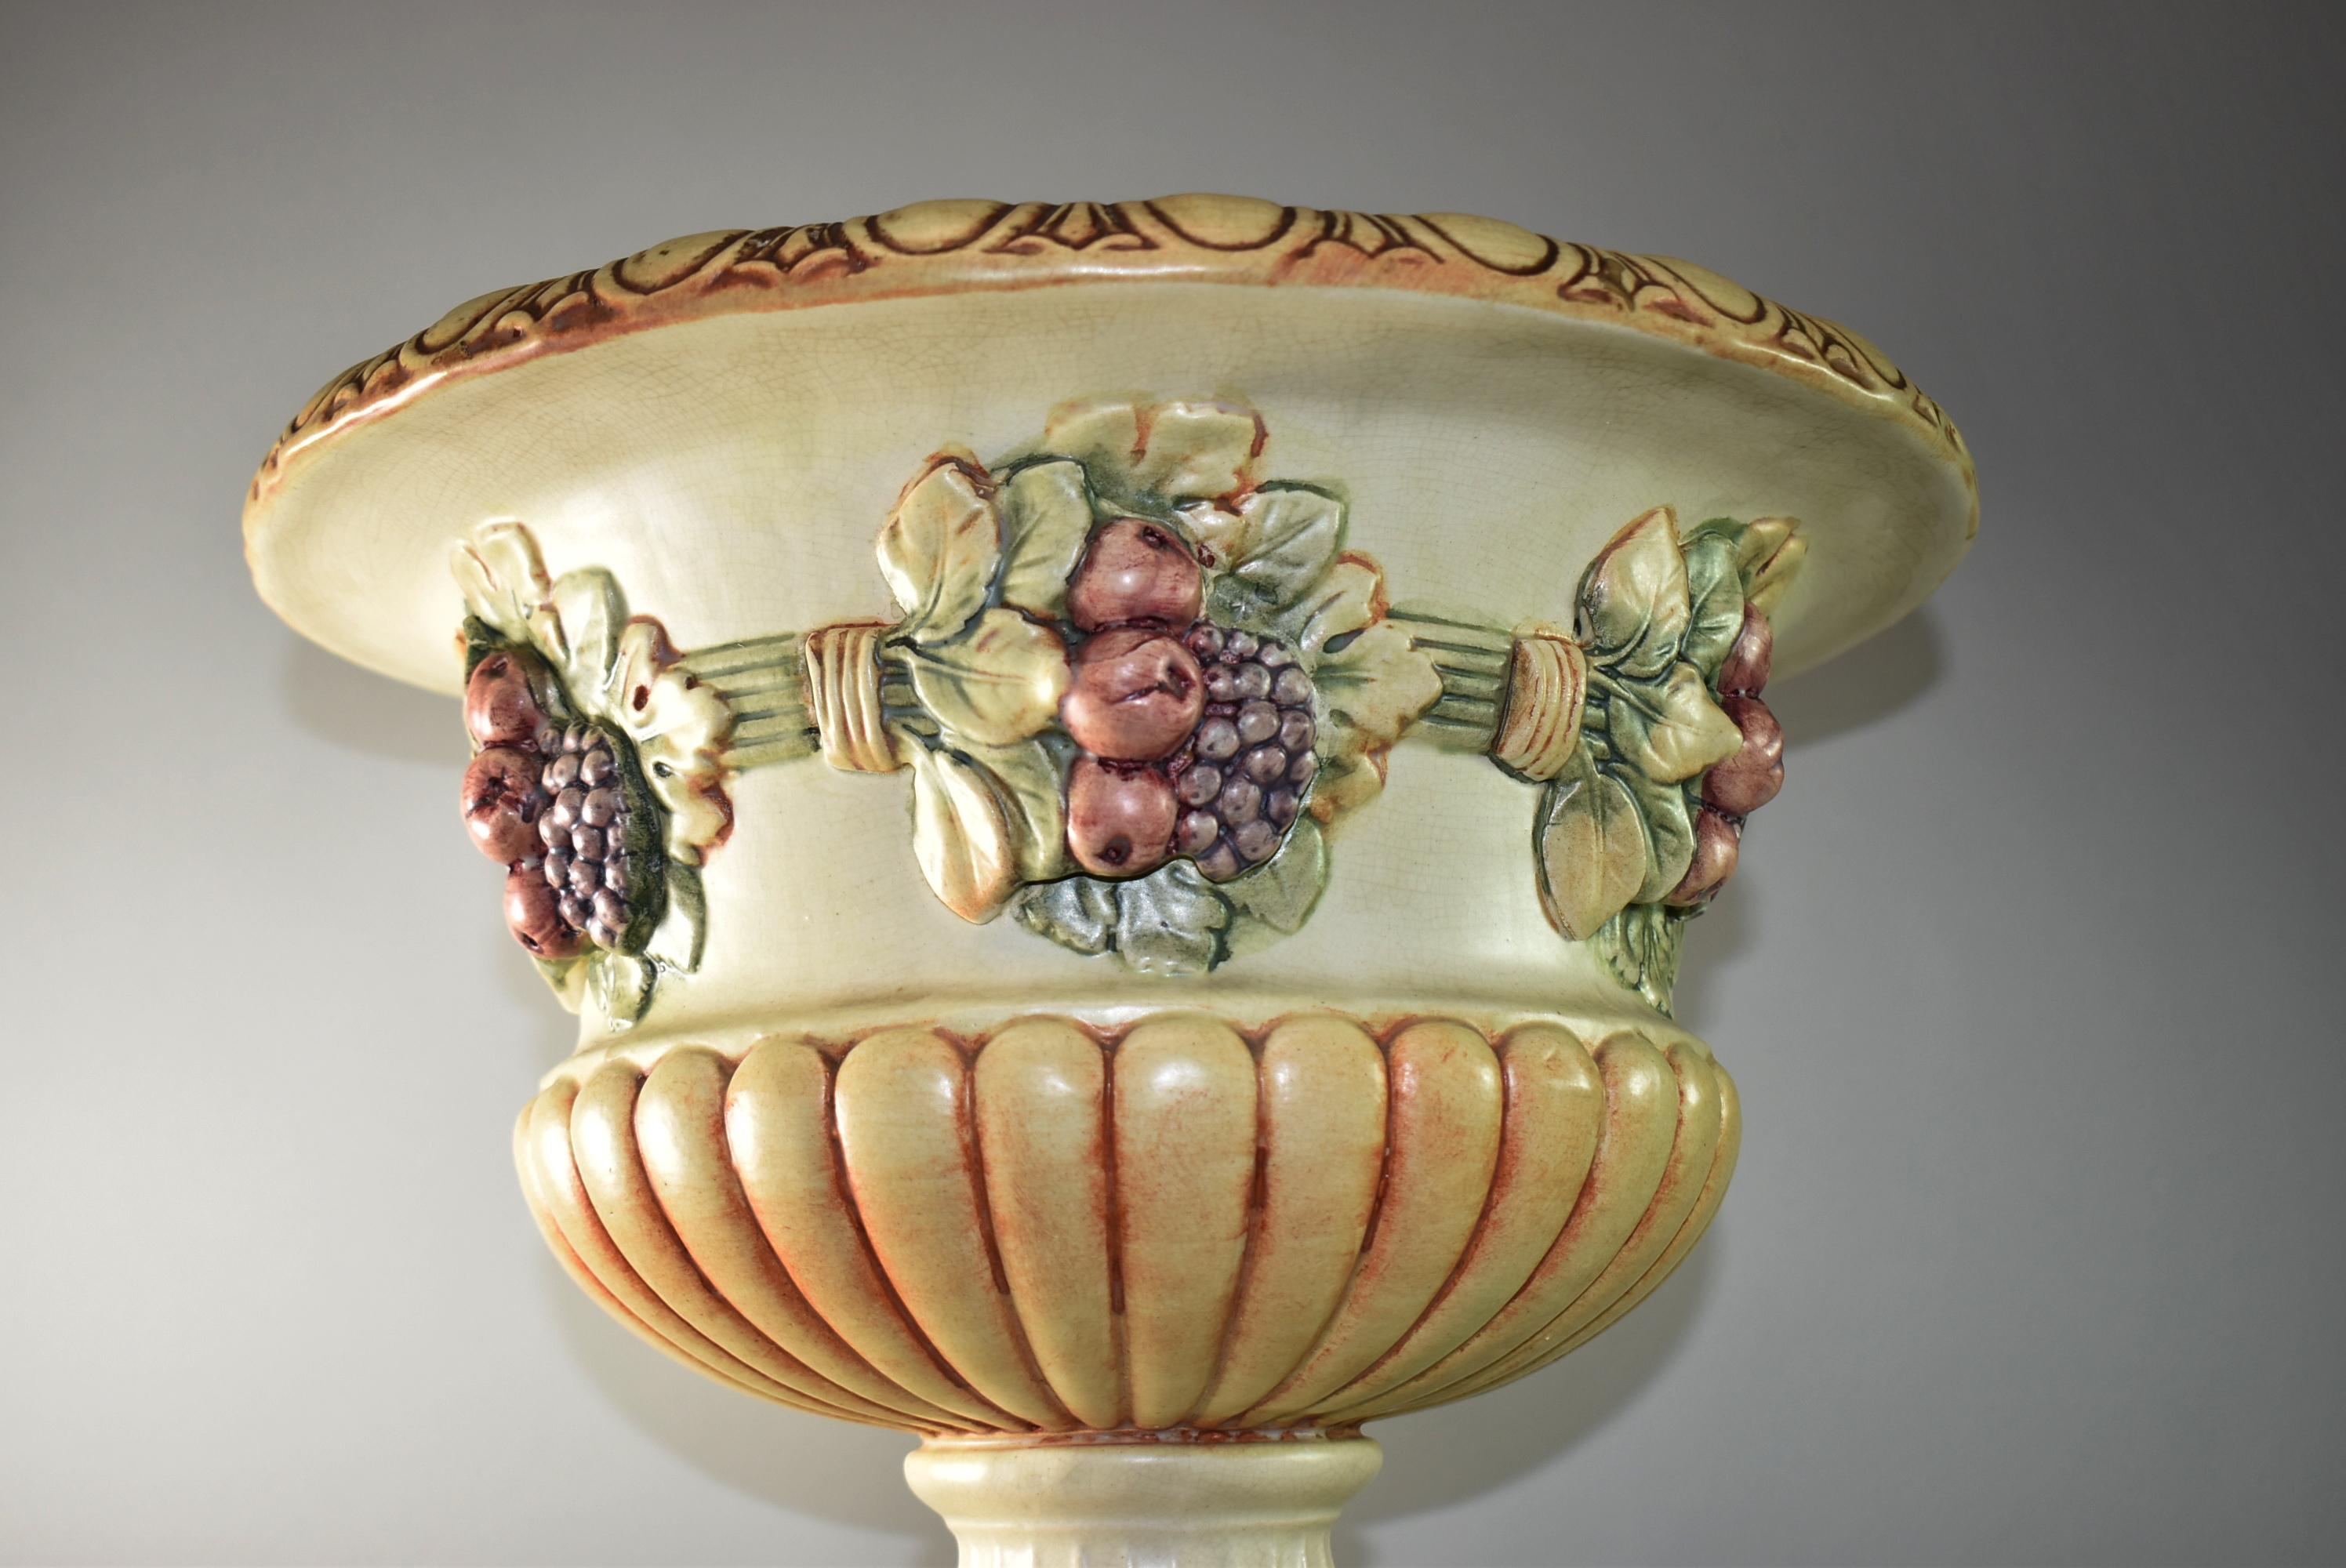 Antique Weller jardinière and pedestal pottery, three pieces, Roma style fruit and leaf border, marked Weller, circa 1910s, light overall crazing, very good condition. Overall dimensions: 28.5